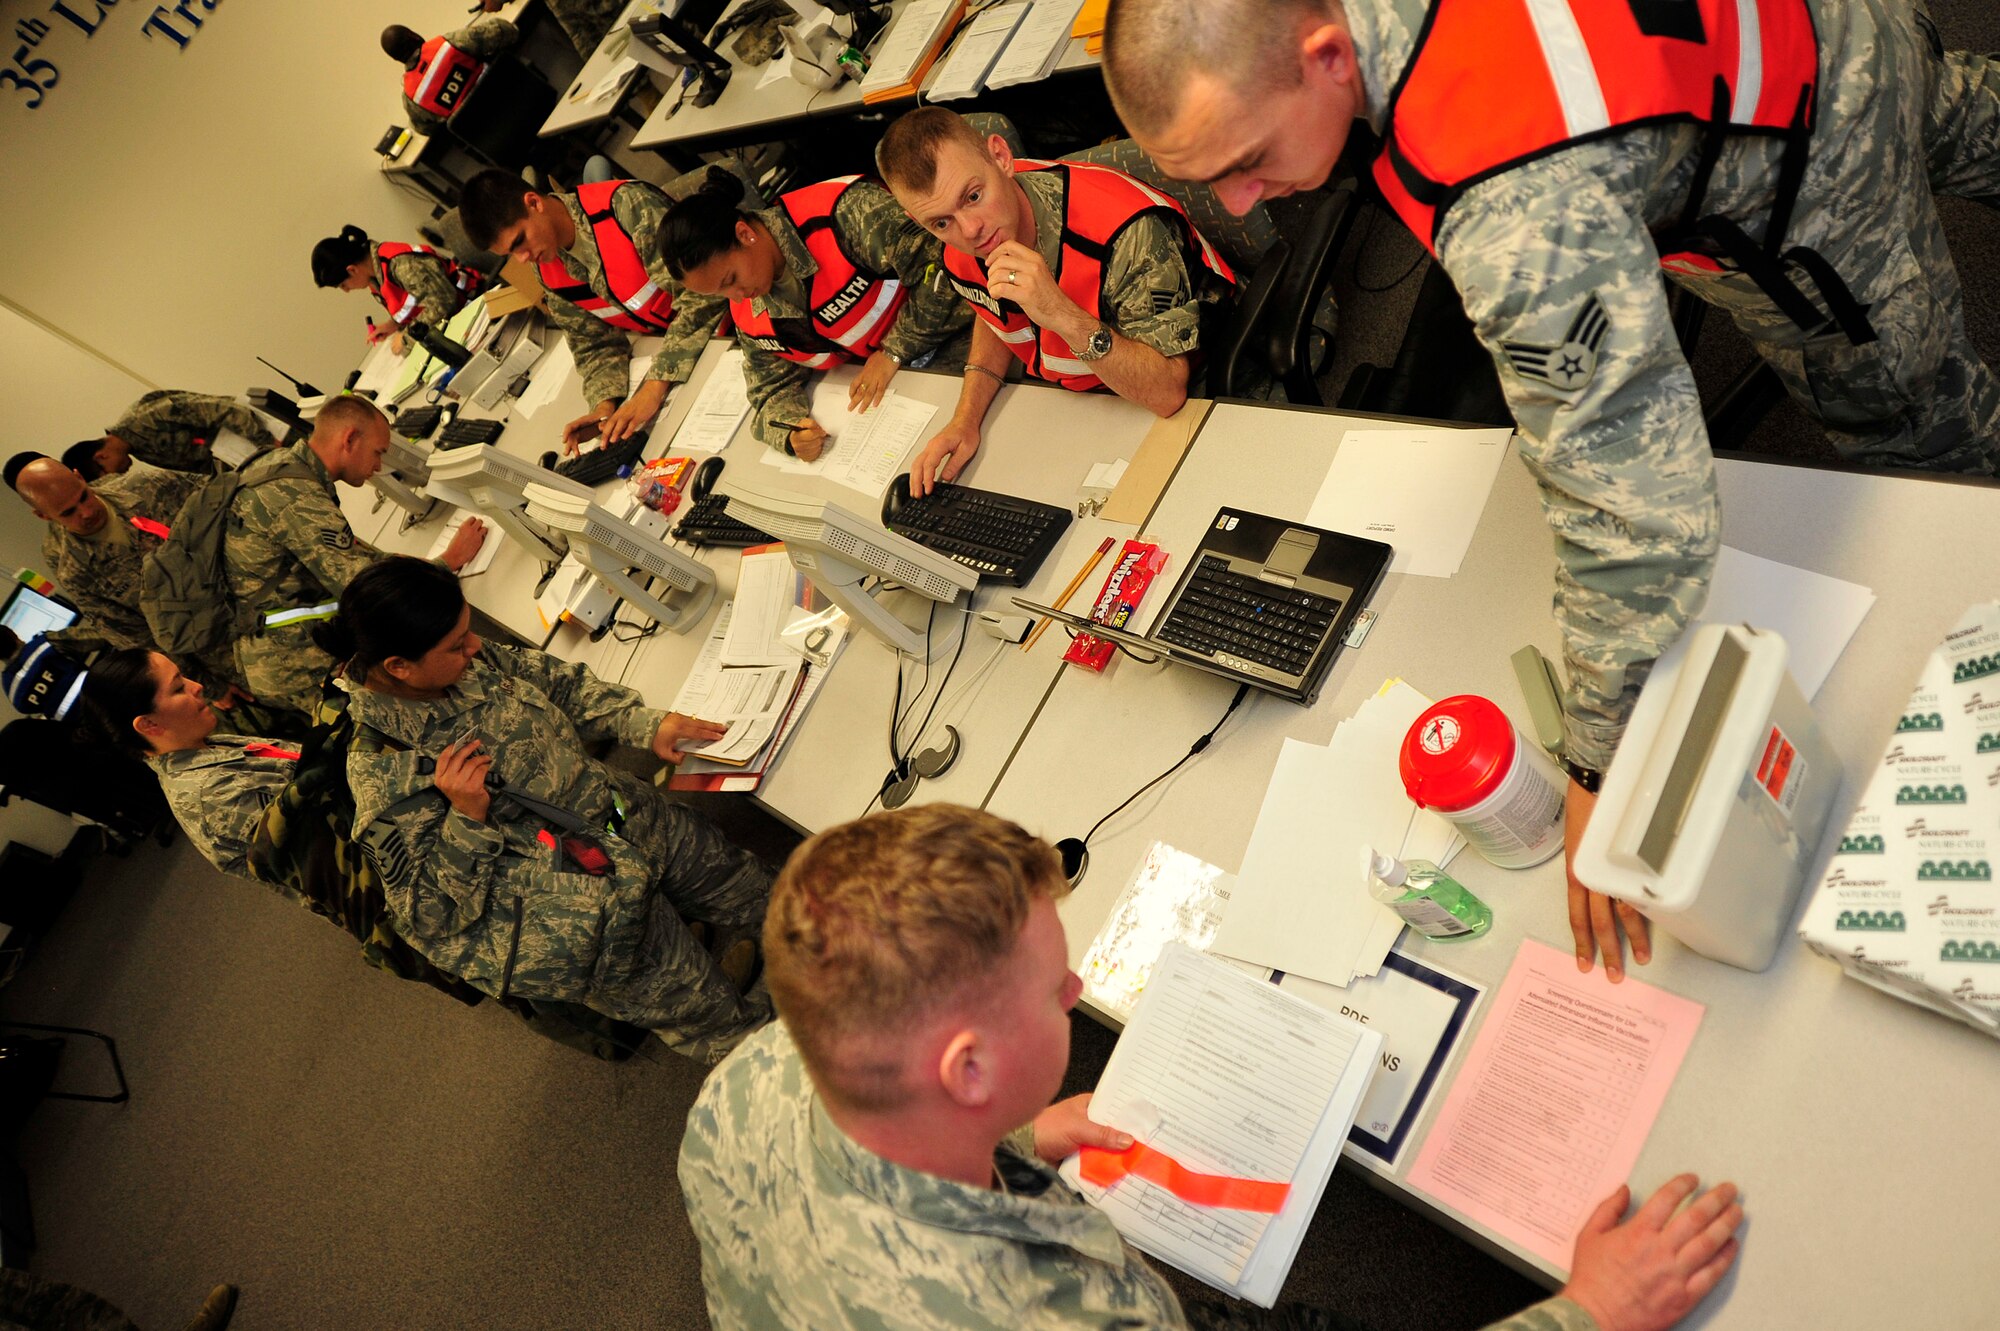 MISAWA AIR BASE, Japan - Airmen make their way through the personnel deployment function line during an initial readiness response exercise here Sept. 30. The PDF is the final check ensuring all deploying airmen's paperwork and medical records are complete and up-to-date before leaving. (U.S. Air Force photo/Staff Sgt. Nathan Lipscomb)